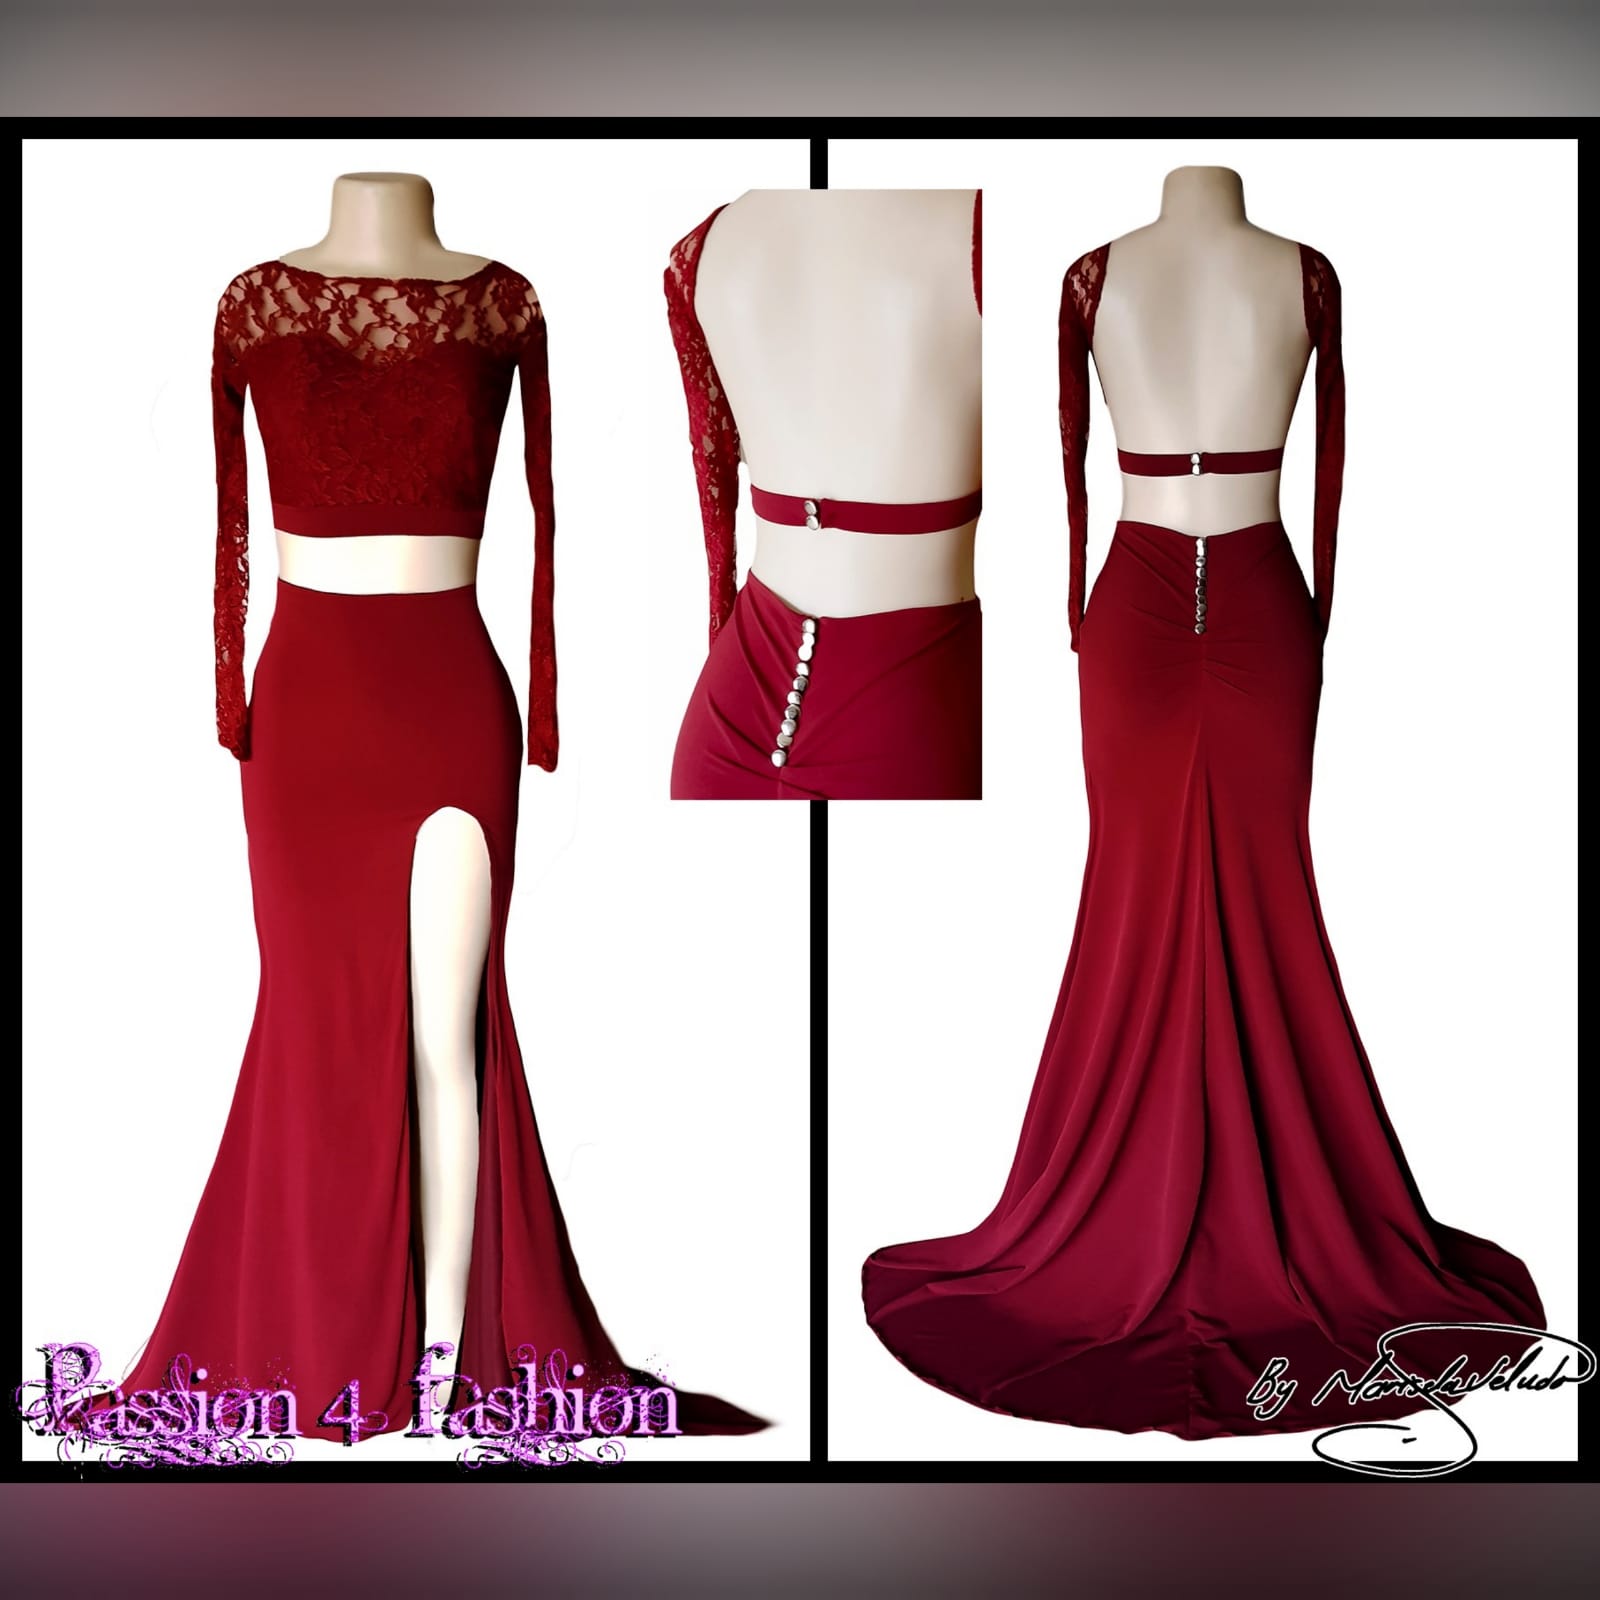 Deep red long sheer lace bodice prom dress 8 deep red long sheer lace bodice prom dress. Long off the shoulder lace sleeves with a rounded open back, slit and train.